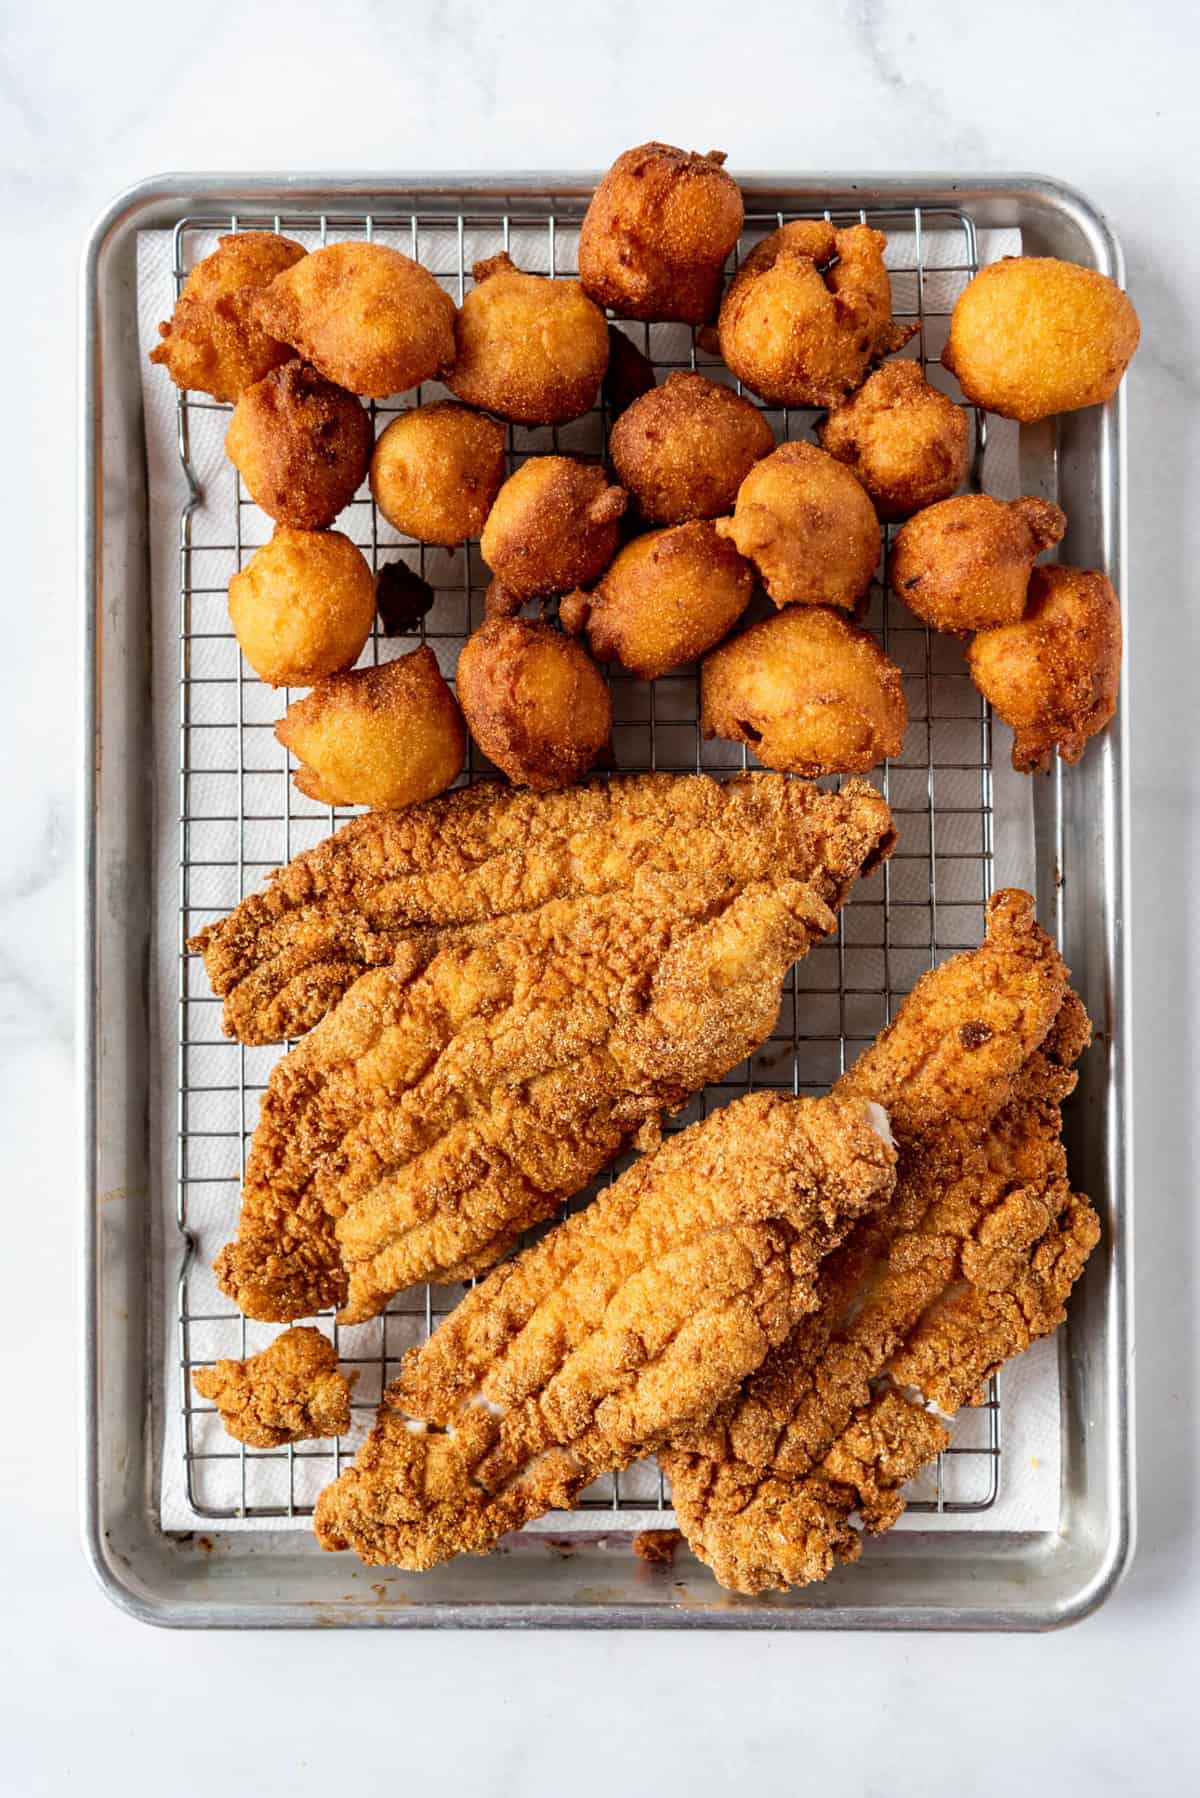 Fried catfish and hush puppies draining on a wire rack set over paper towels lining a baking sheet.